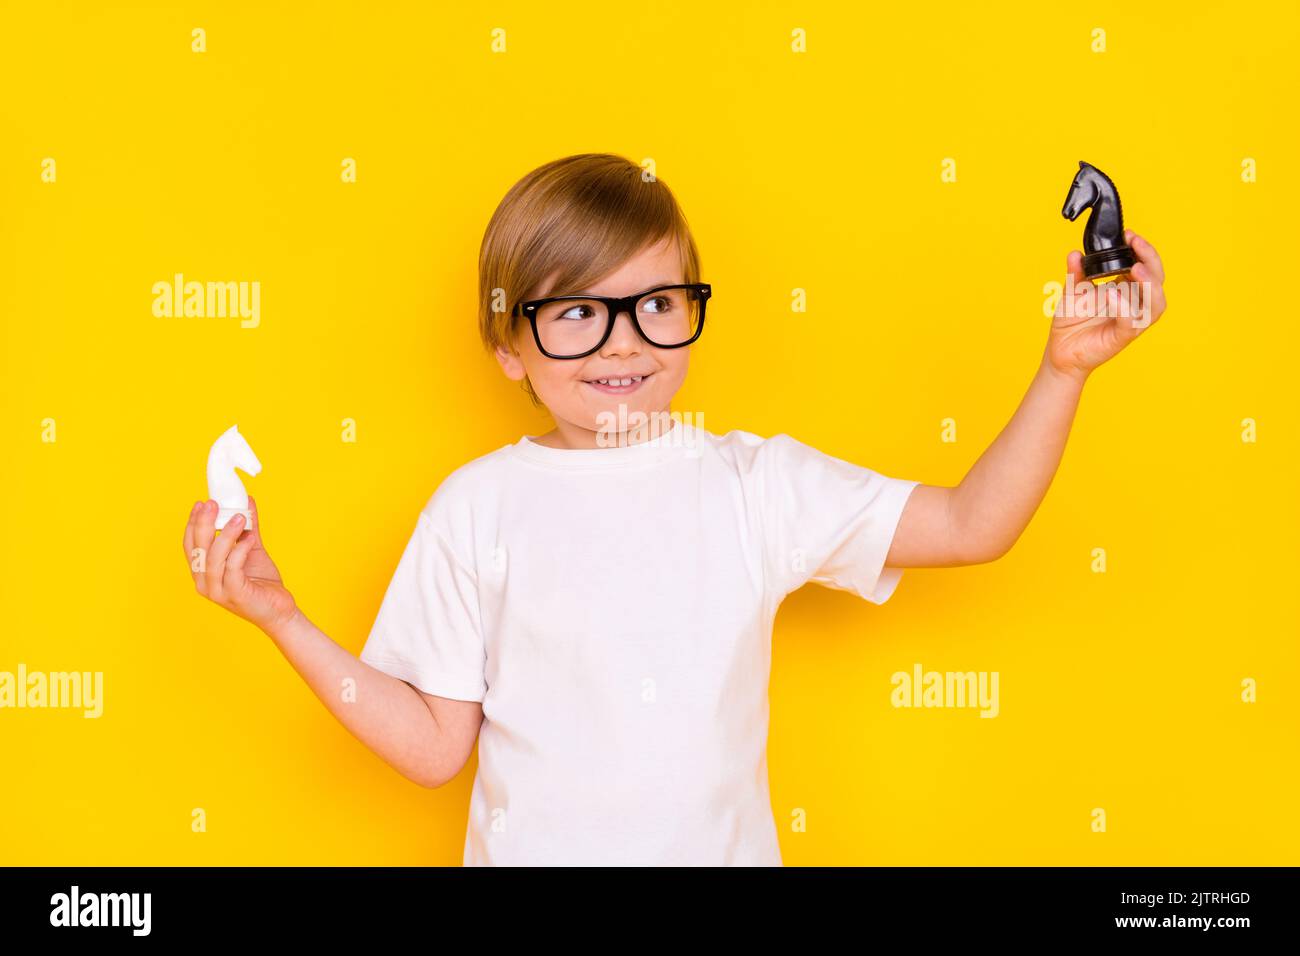 Portrait of handsome cheerful intellectual pre-teen boy holding chess figures playing move isolated over bright yellow color background Stock Photo